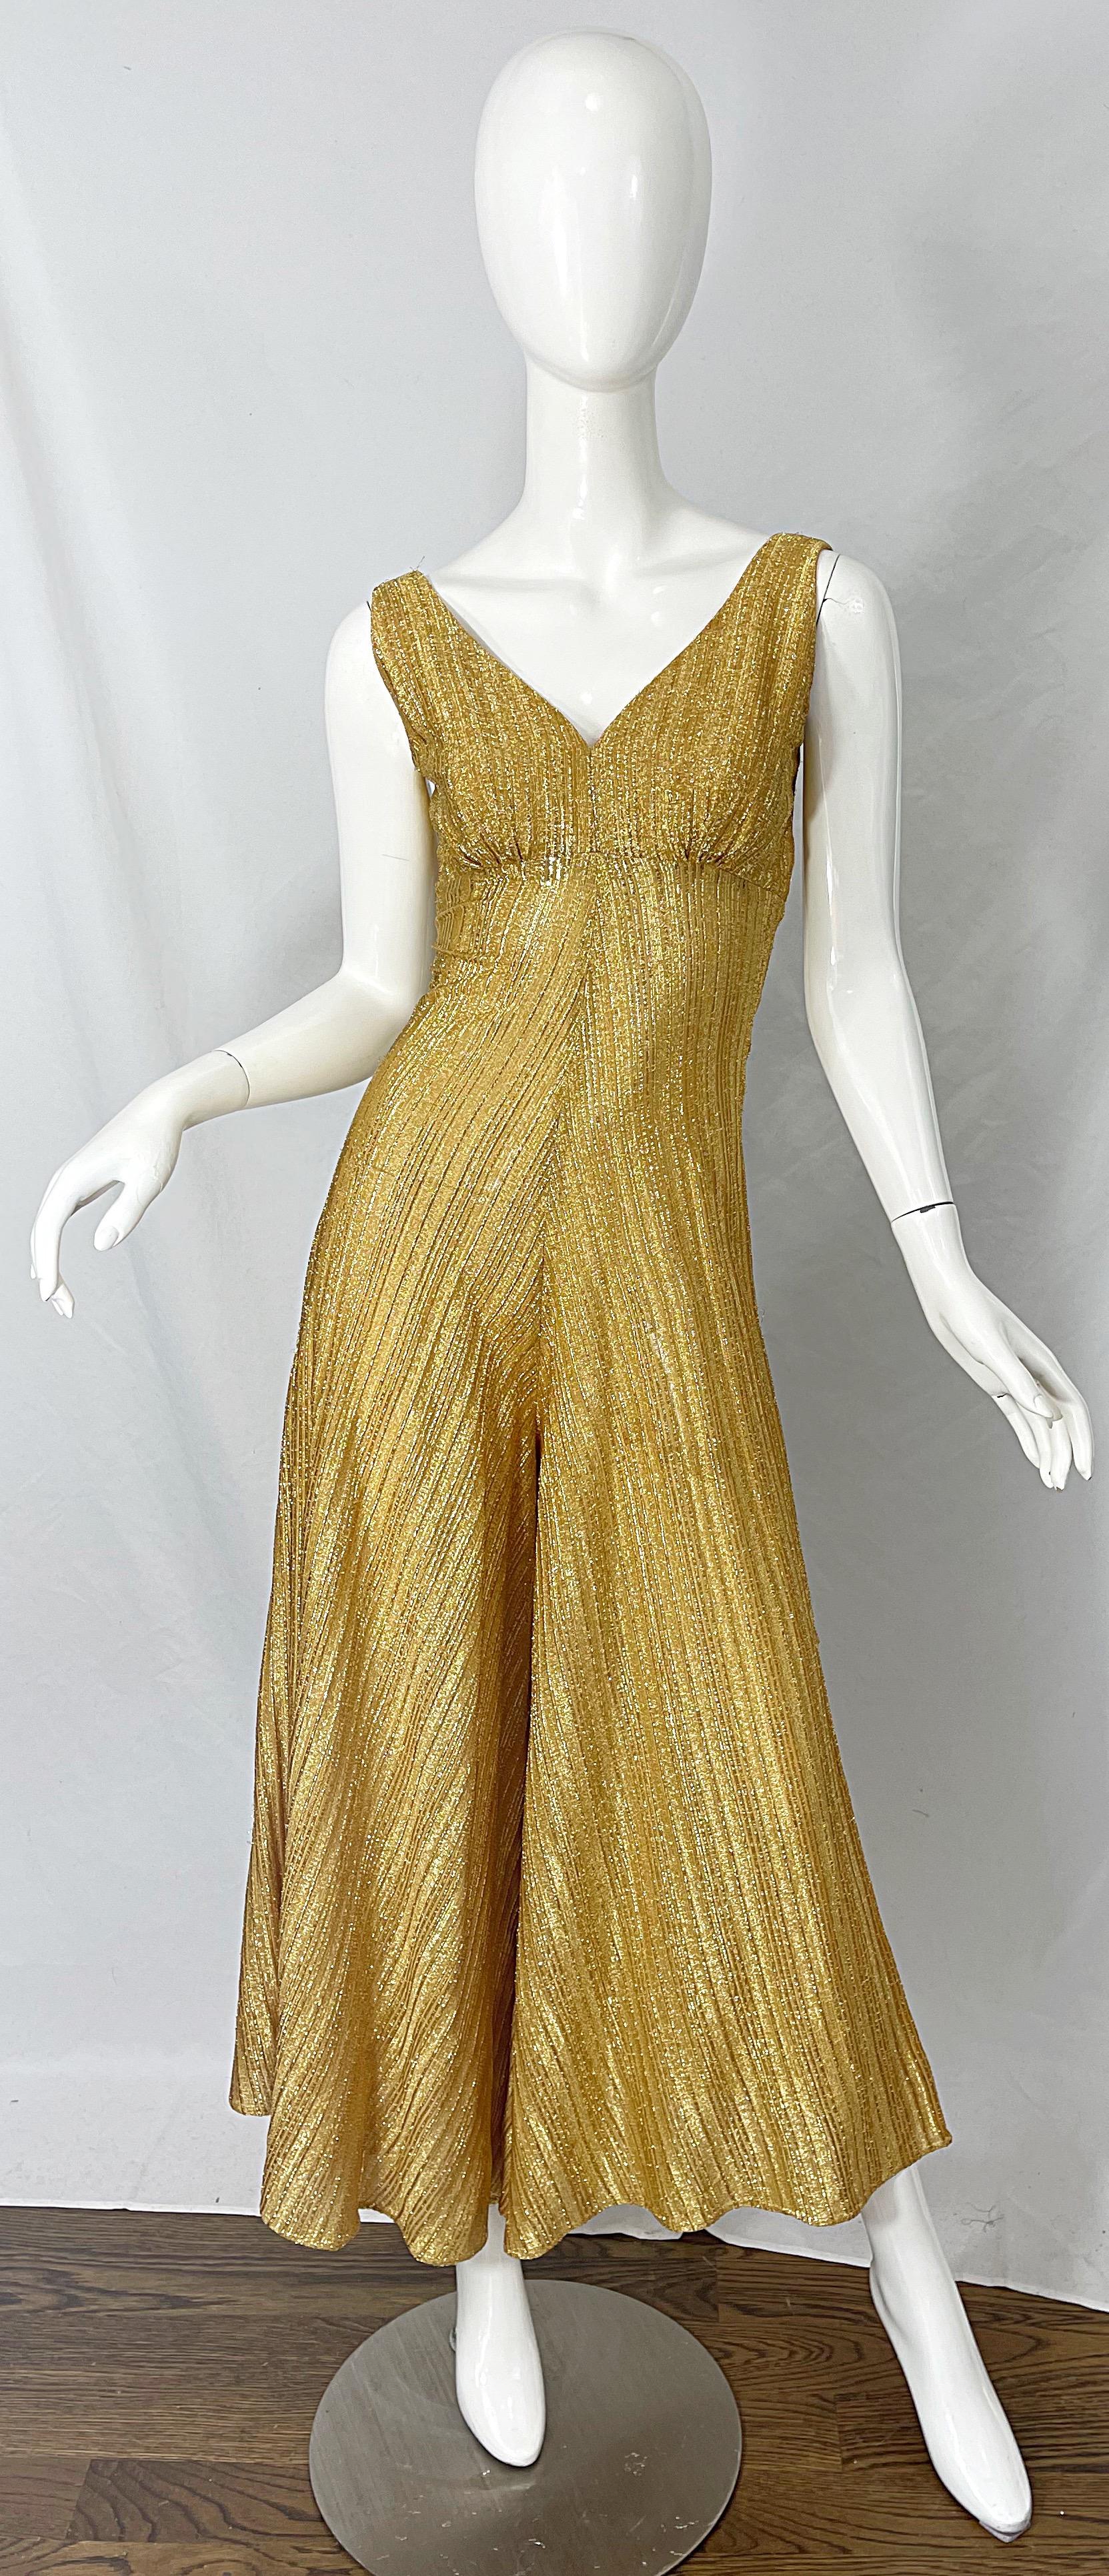 Amazing 1970s metallic gold lurex wide leg disco Studio 54 sleeveless jumpsuit ! Features a tailored bodice with flowy wide legs. Hidden zipper up the back with hook-and-eye closure. The perfect alternative to a dress.
In great